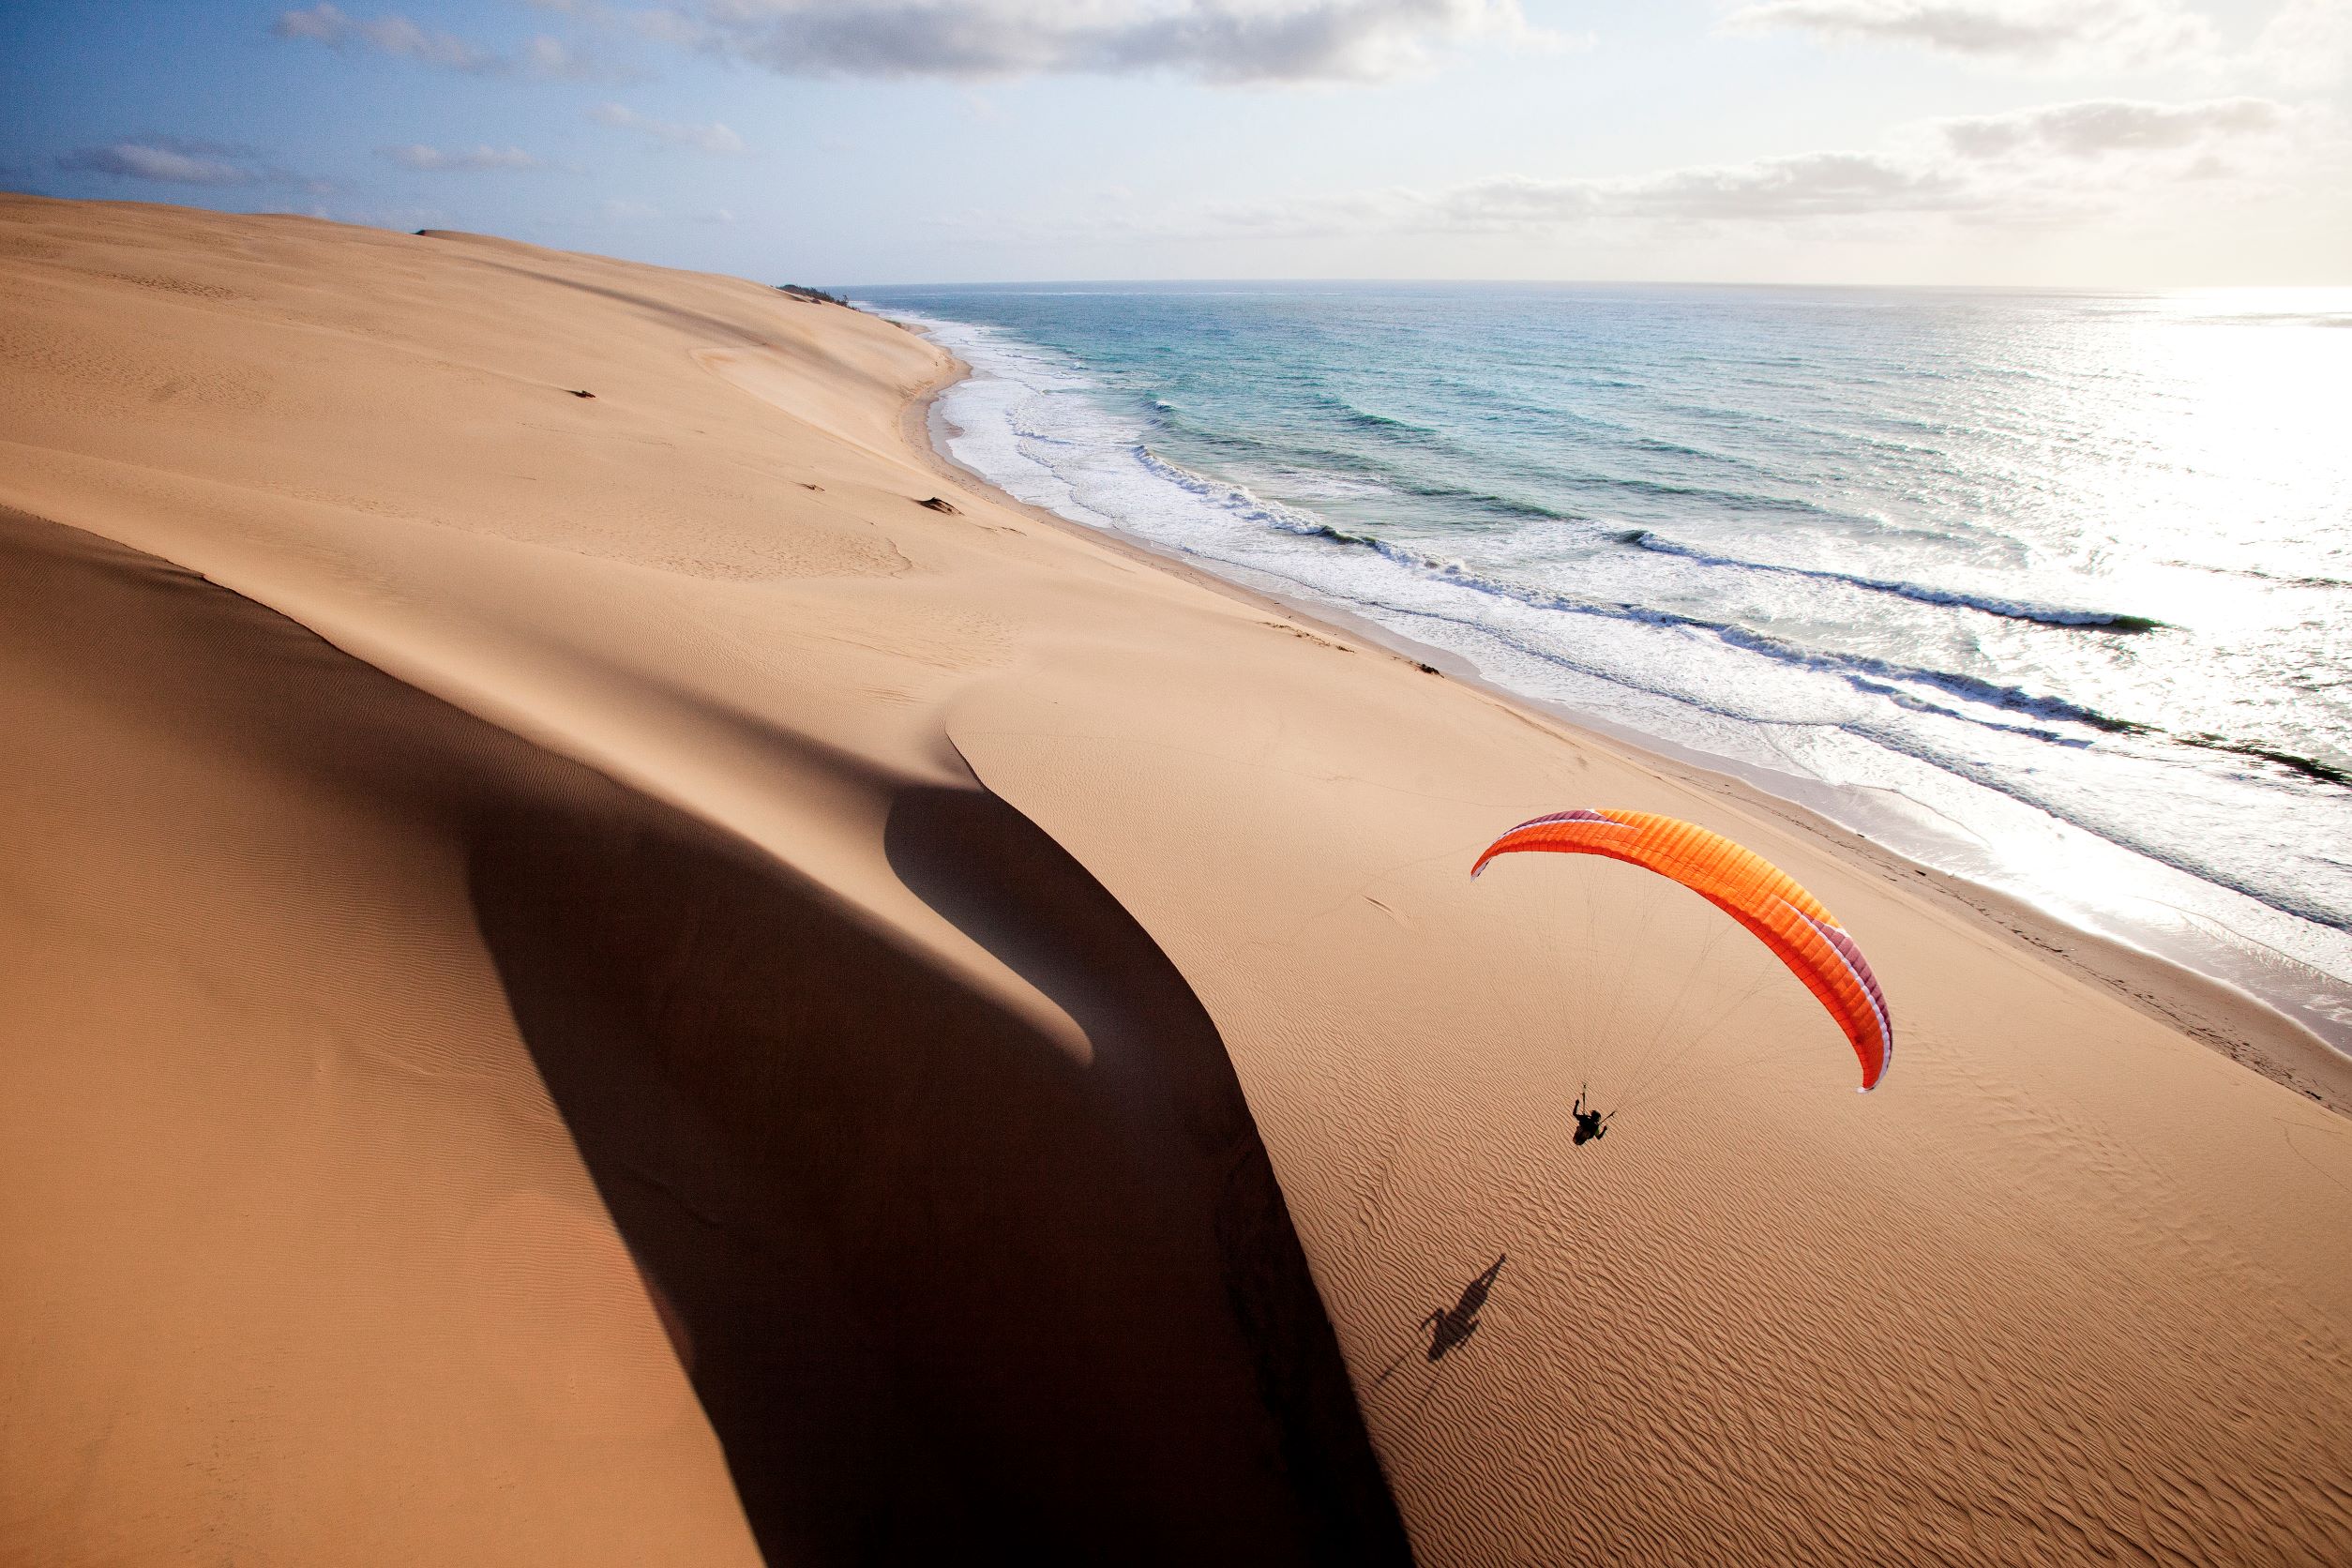 Paragliding over a sand dune in Mozambique